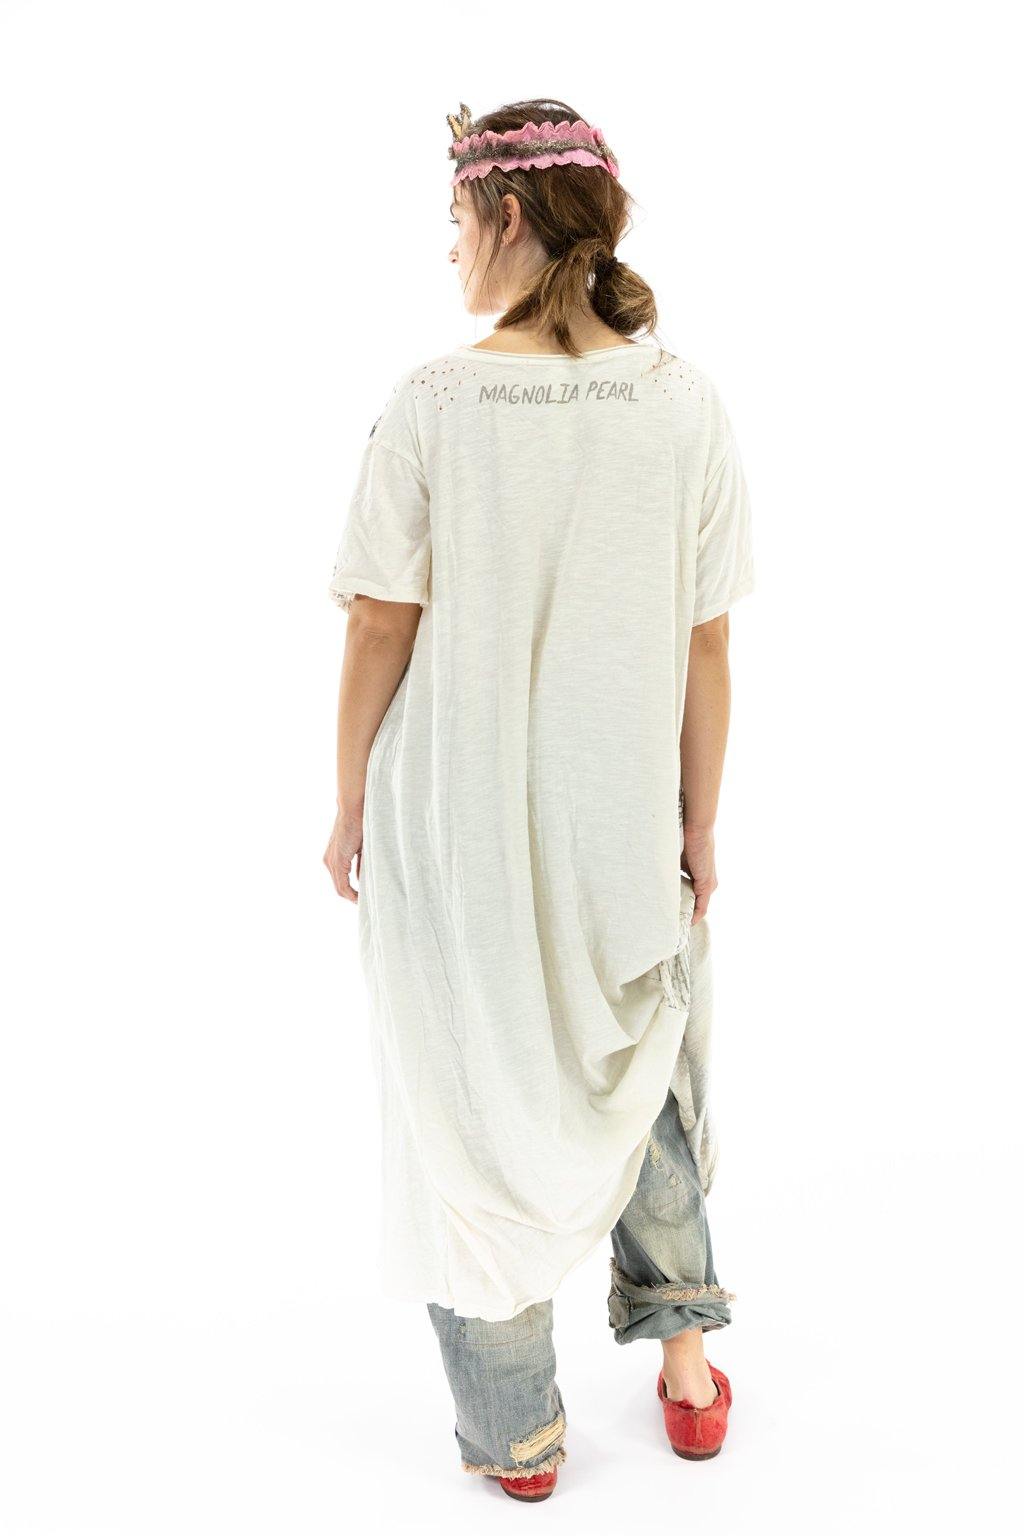 Freedom of Conscience T Dress - Magnolia Pearl Clothing